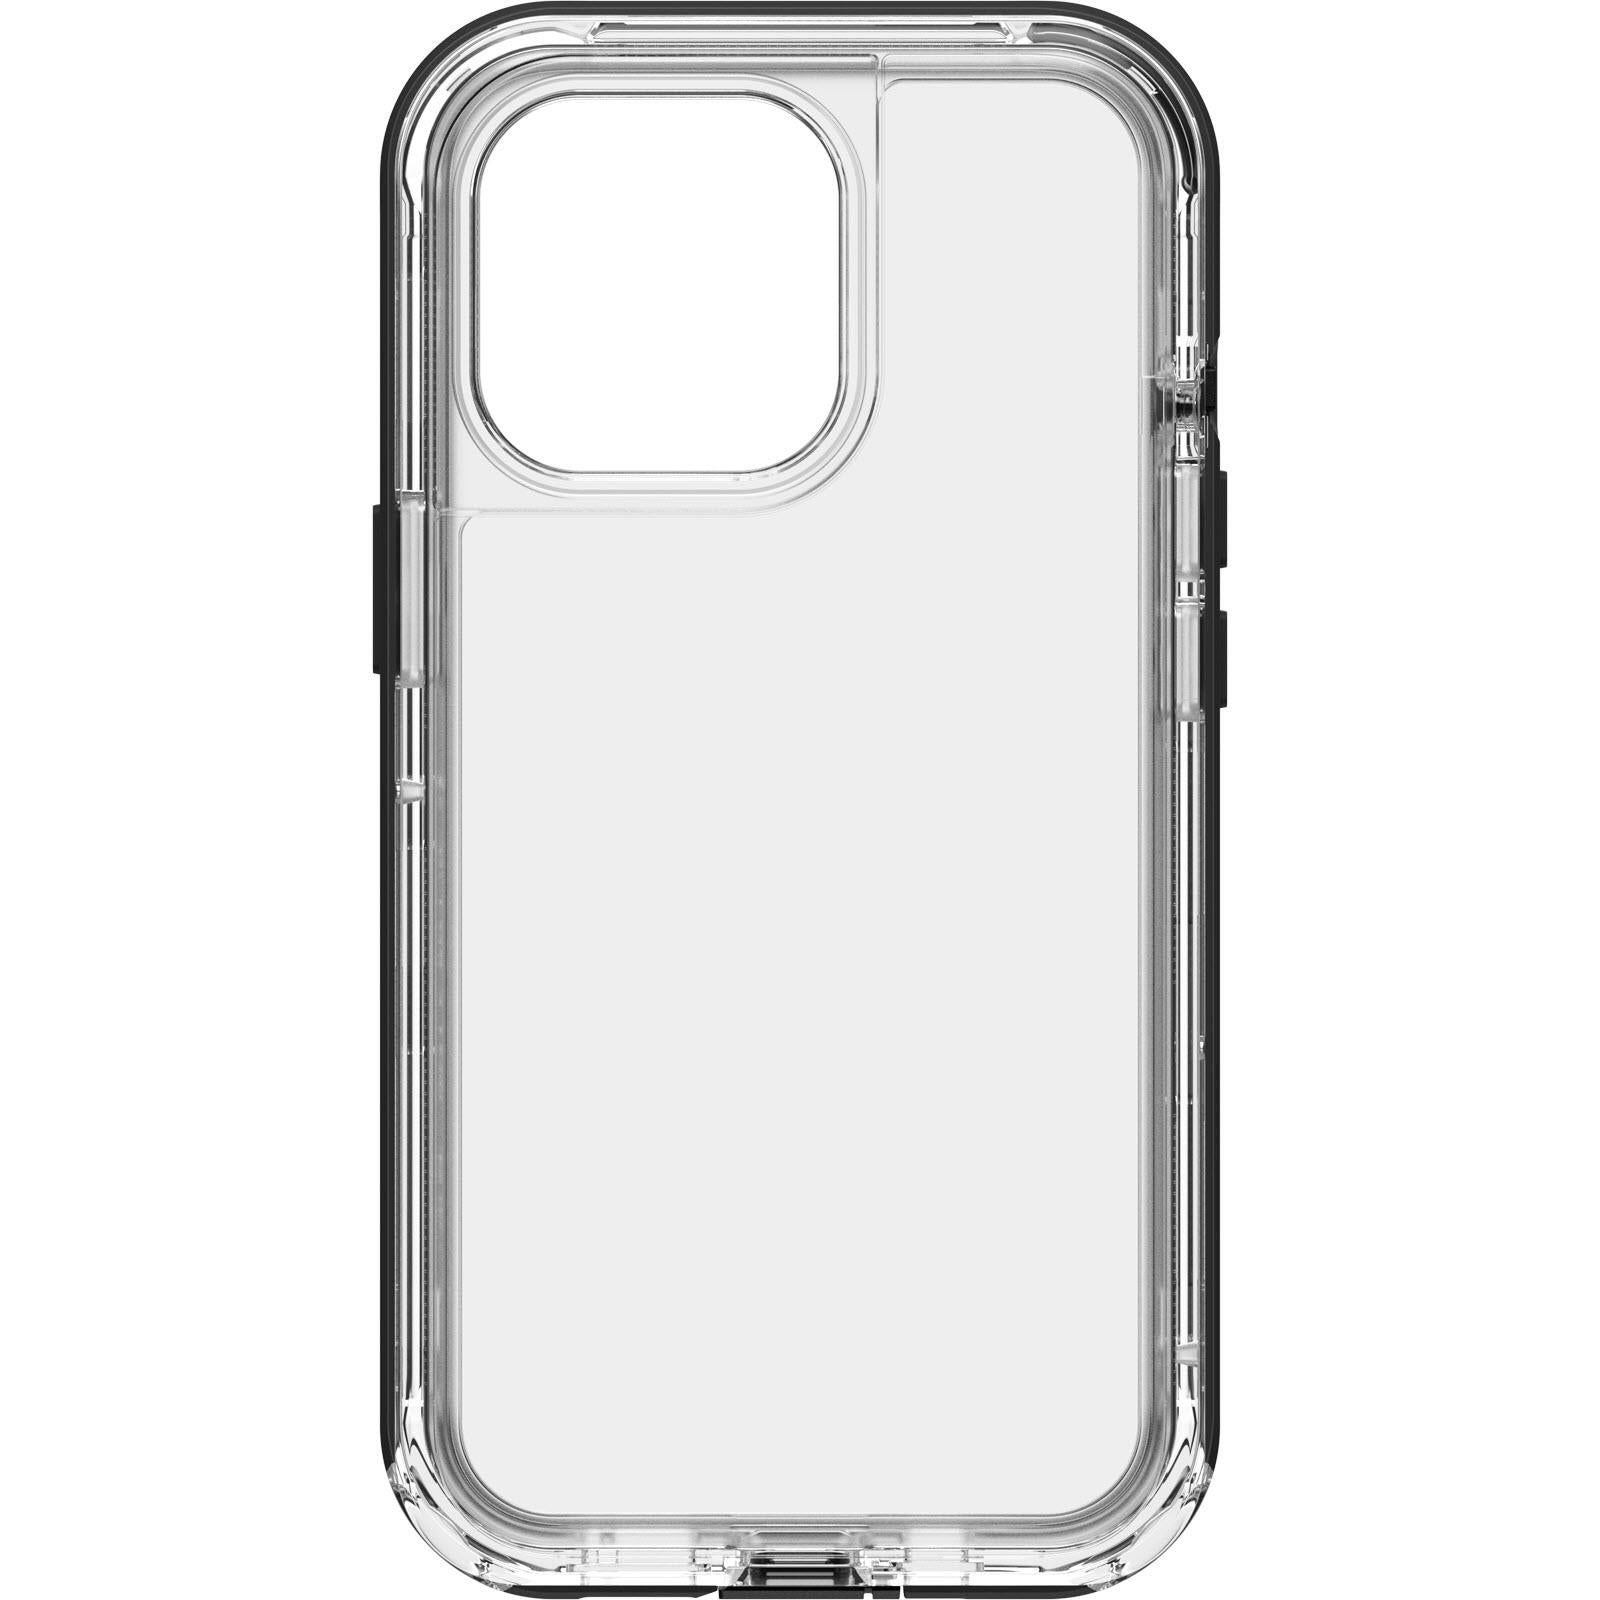 lifeproof next case for iphone 13 pro max (black crystal)